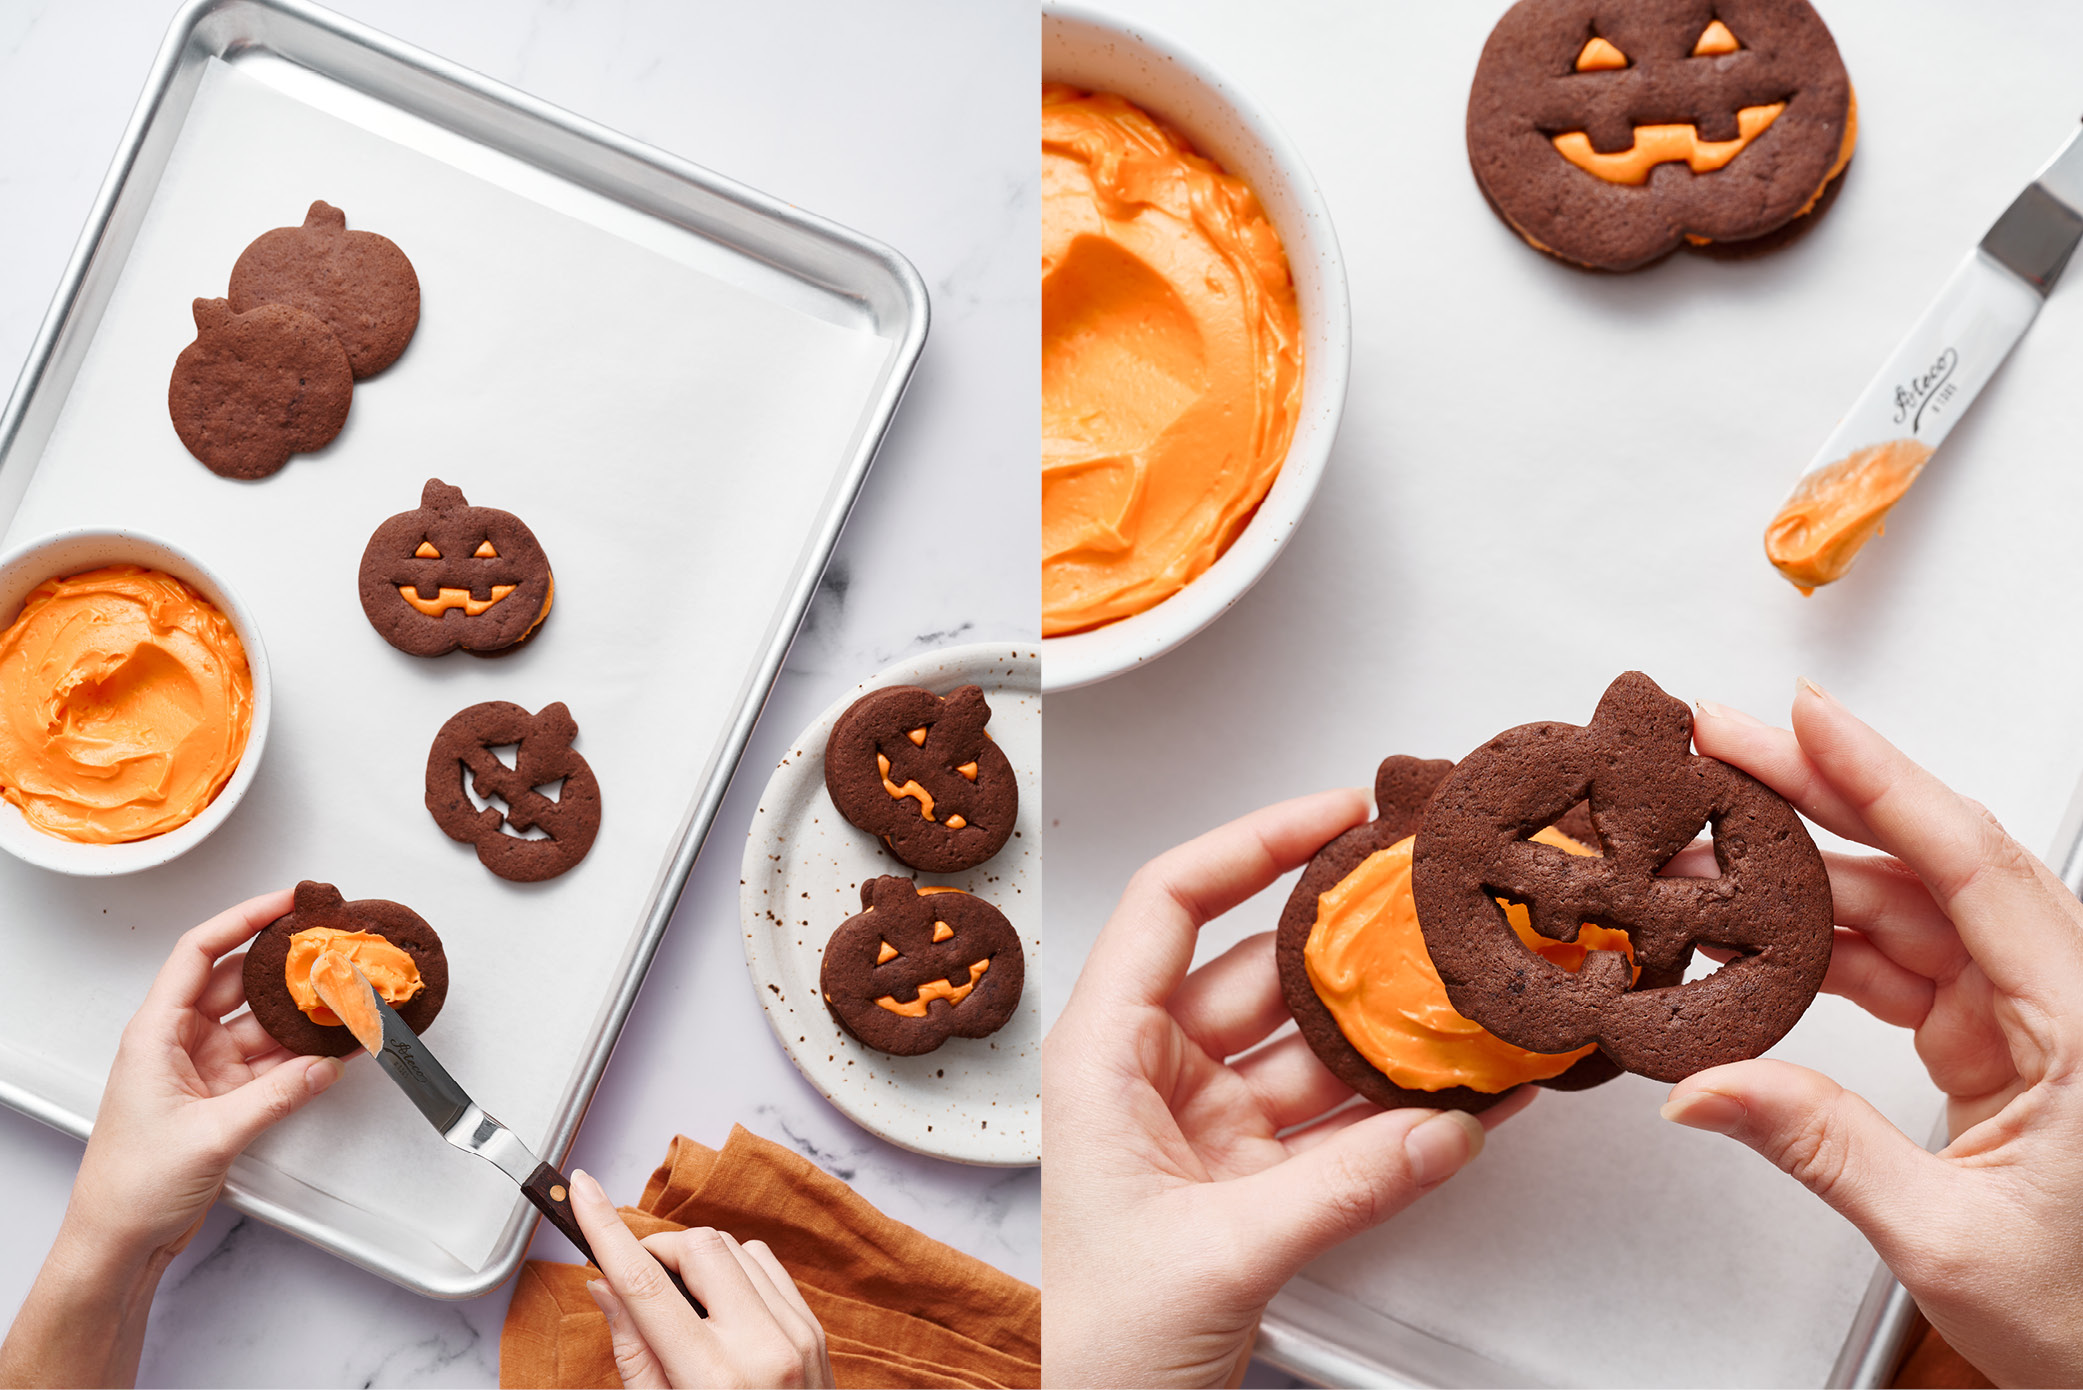 side-by-side images showing how to fill the jack-o-lantern cut-out cookies